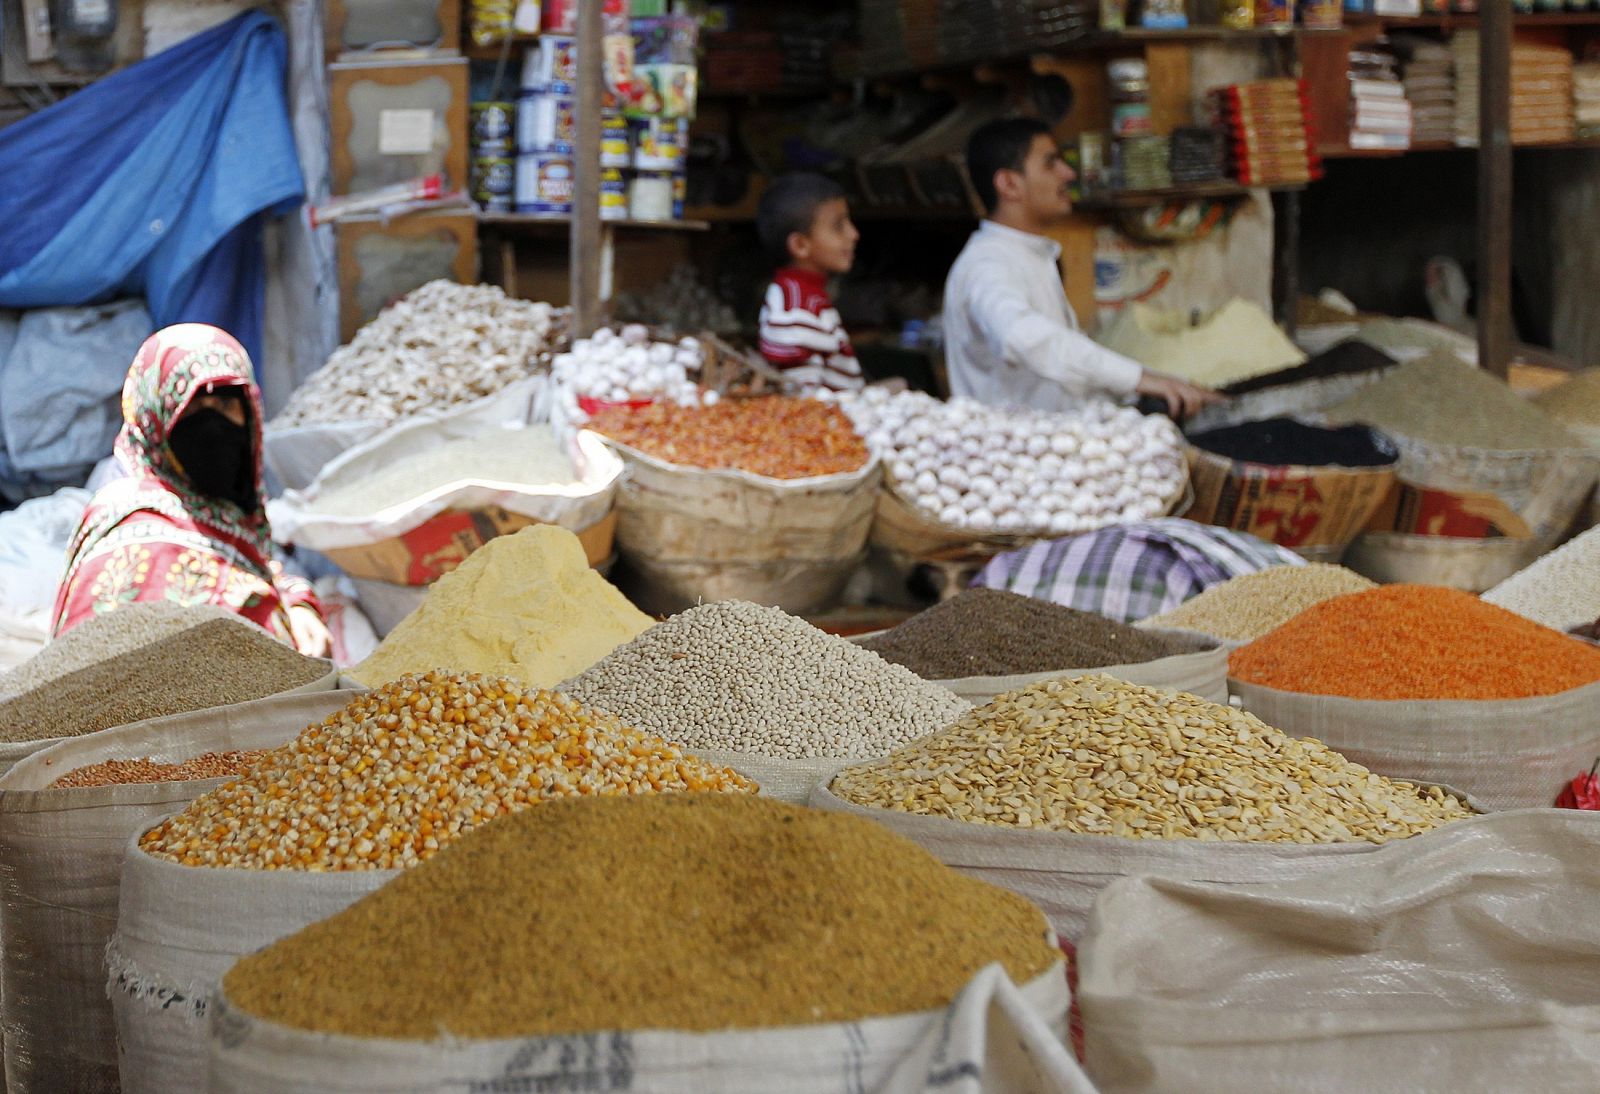 A woman walks past a shop selling spices and vegetables in preparation for the Muslim holy month of Ramadan, in the Old City of Sanaa